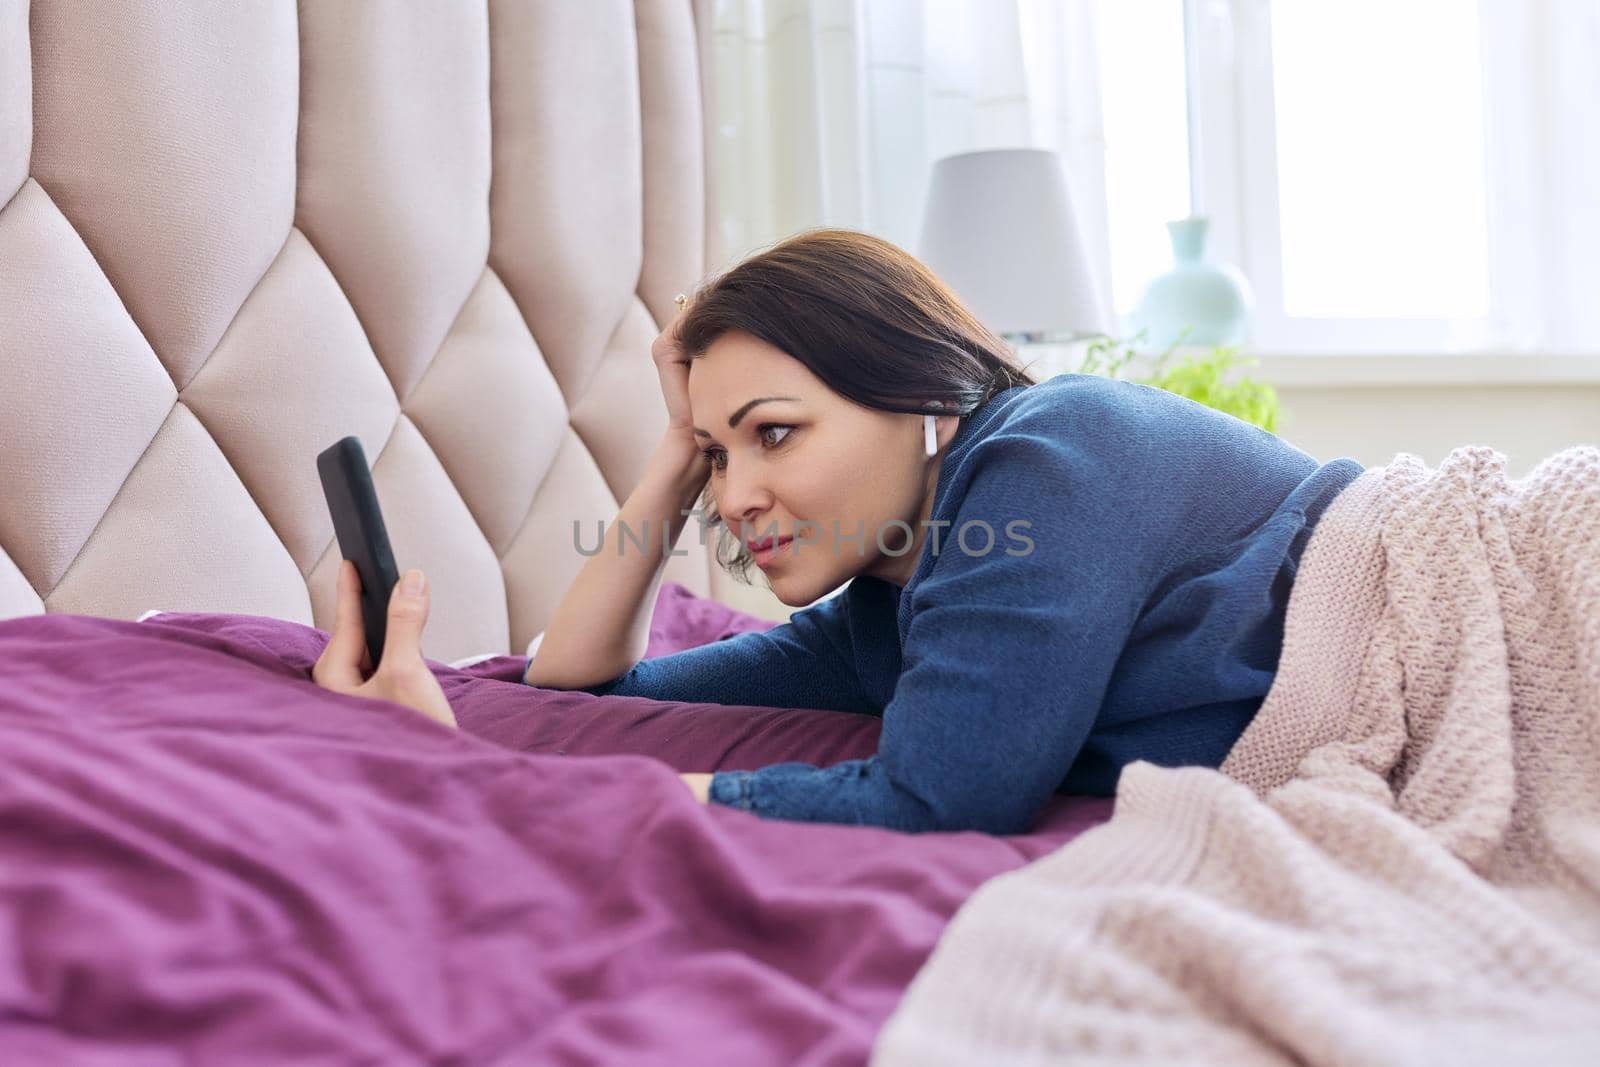 Smiling middle-aged woman in headphones looking in smartphone, resting female lying in bed at home, video on the phone, film, vlog, social network. Lifestyle, rest, technology, mature people concept